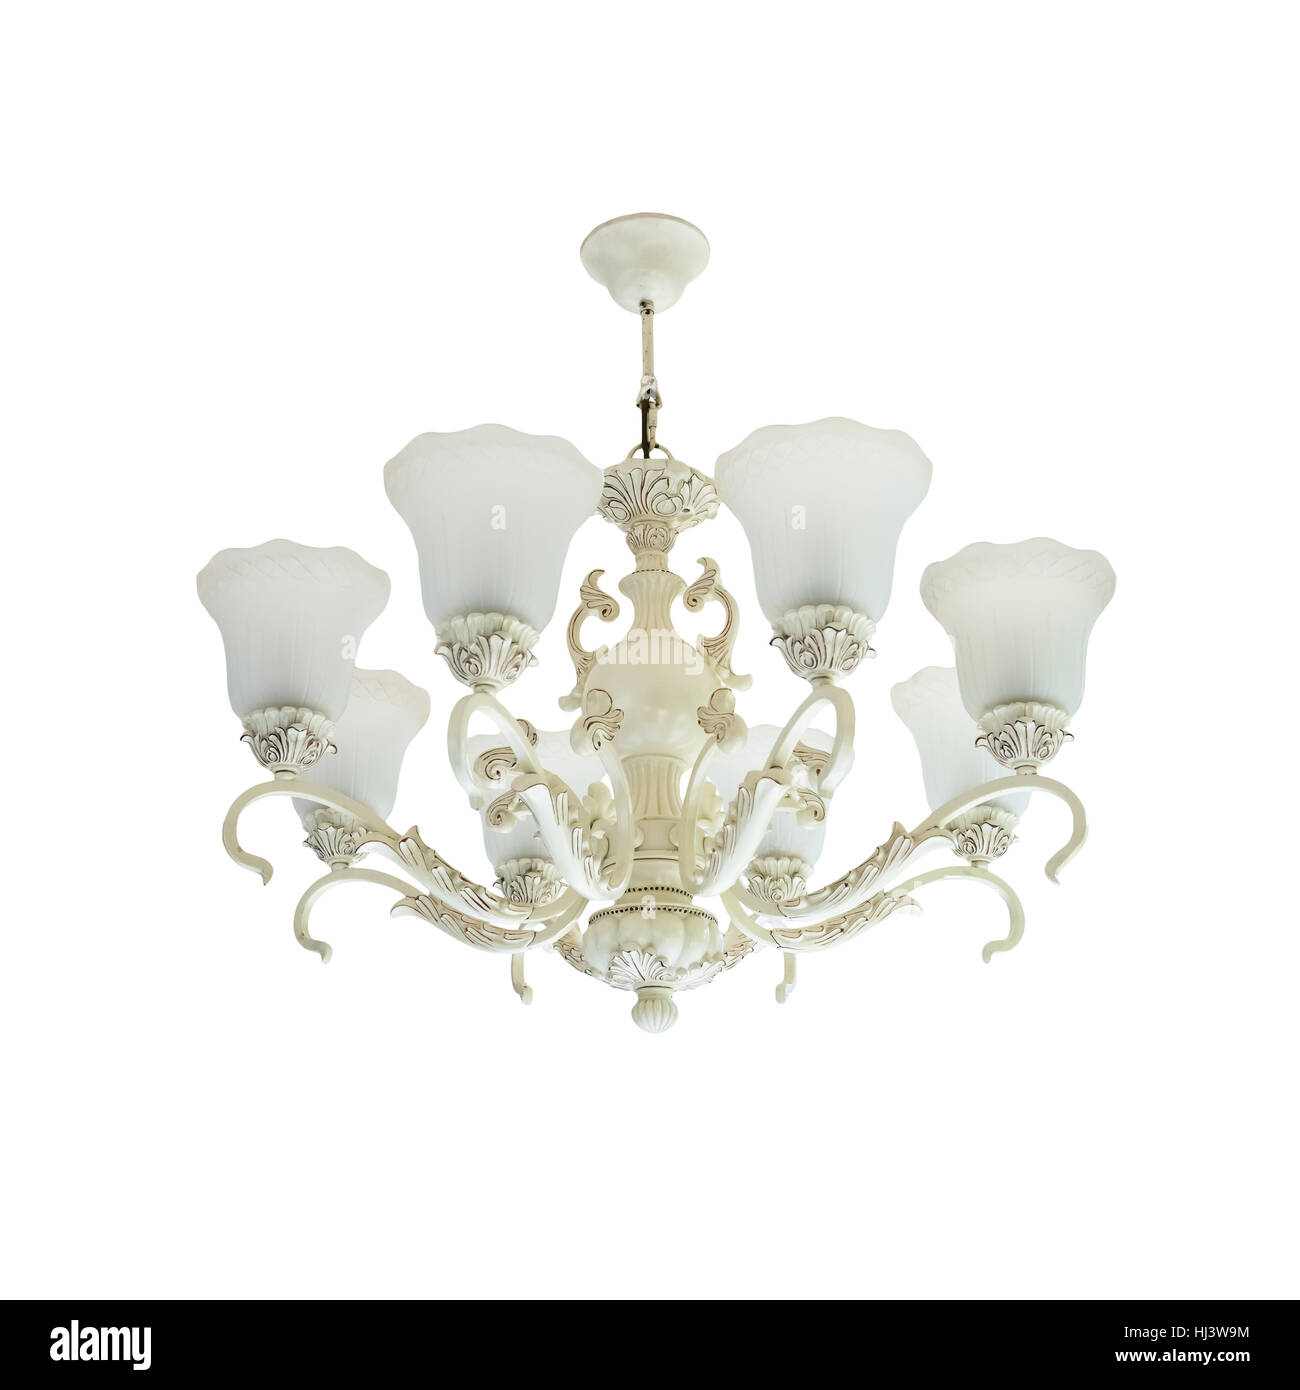 Vintage Luxury Chandelier made in France isolated on white background Stock Photo